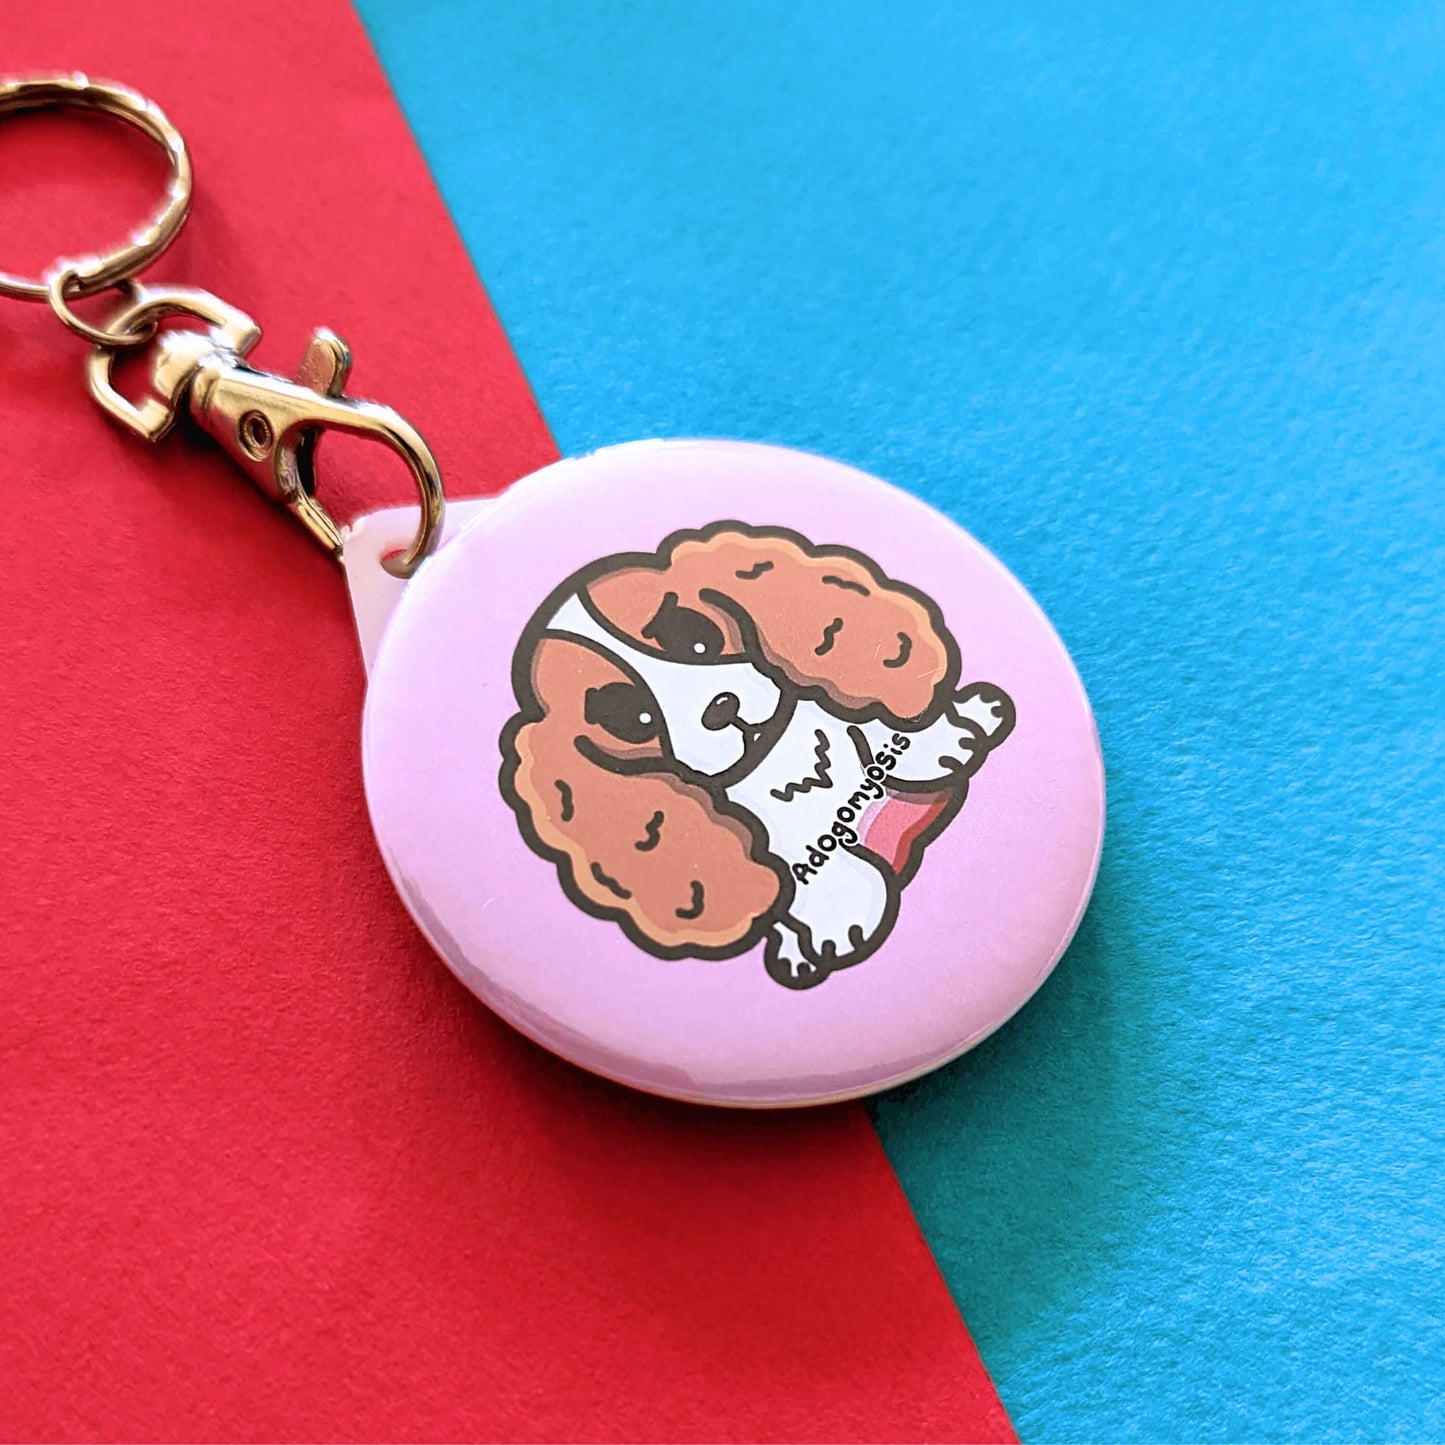 A sad spaniel dog with a red tummy and black text reading adogomyosis on a pink background plastic circular keychain hanging on a silver lobster clip. Adogomyosis Keyring - Adenomyosis is on a red and blue background. Raising awareness for adenomyosis.